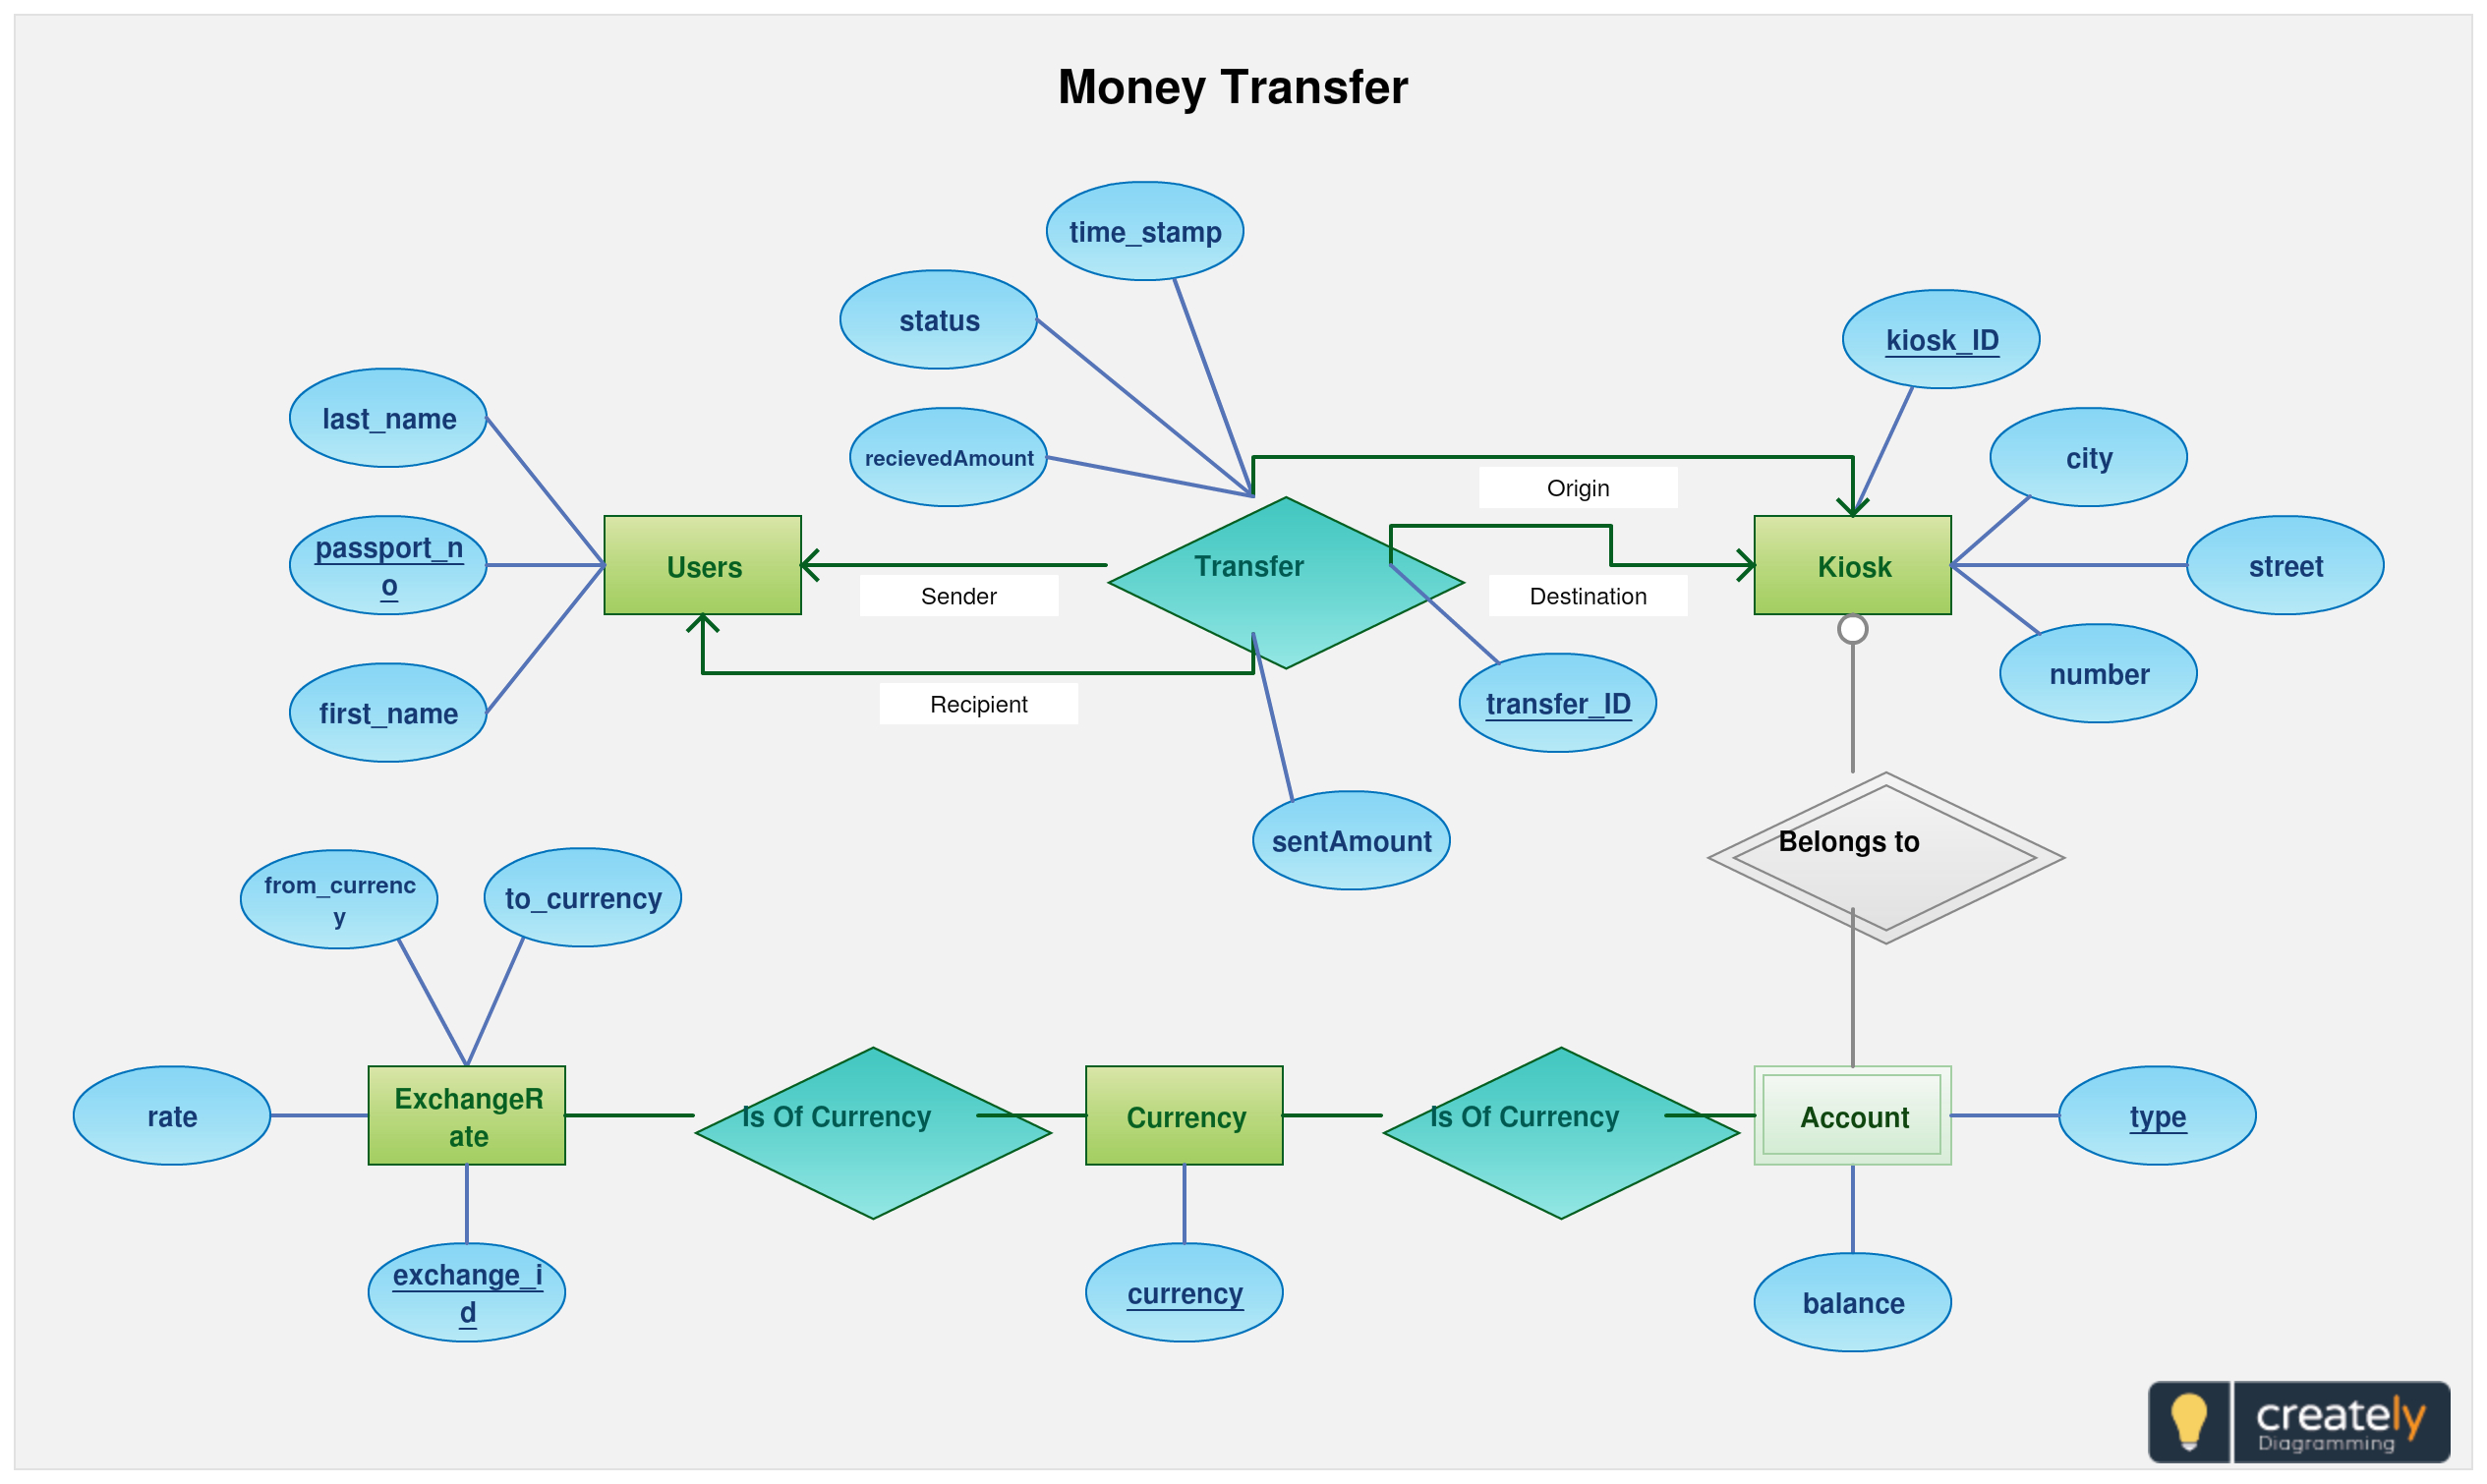 Entity Relationship Diagram Of Fund Transfer - Use This for Create Er Diagram Online